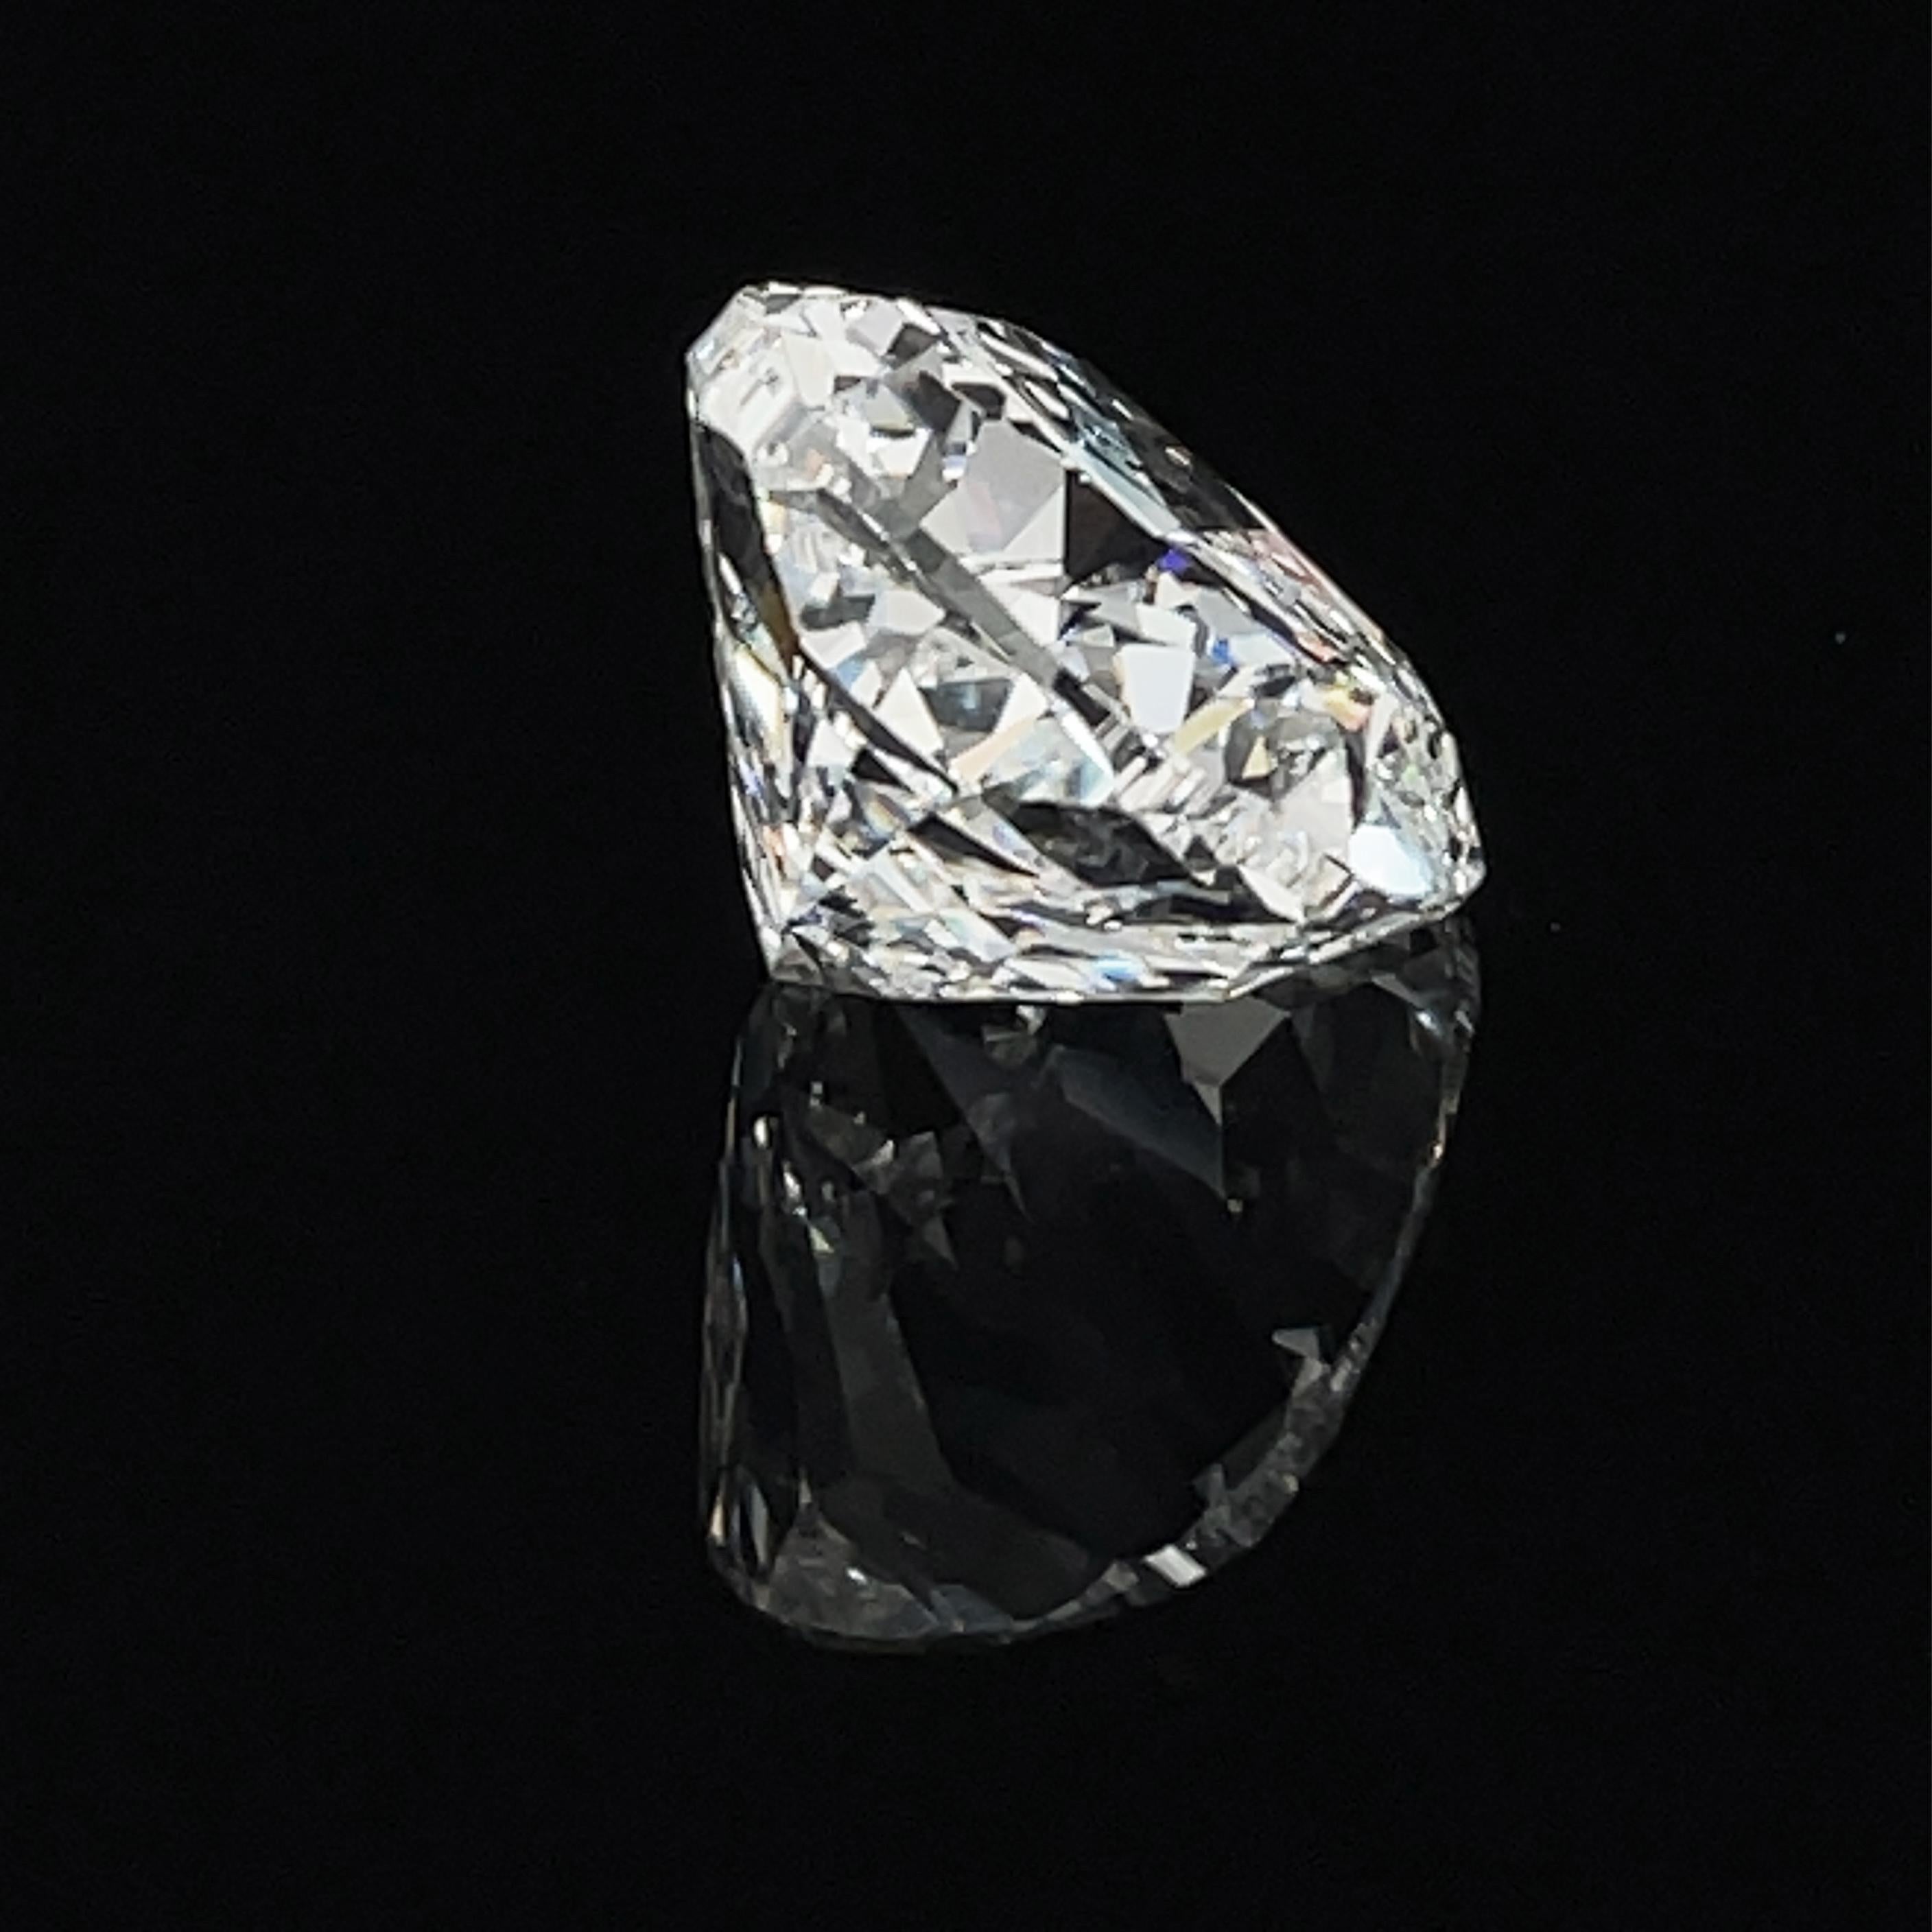 Contemporary 10.01 Cushion Cut Diamond GIA Certified For Sale